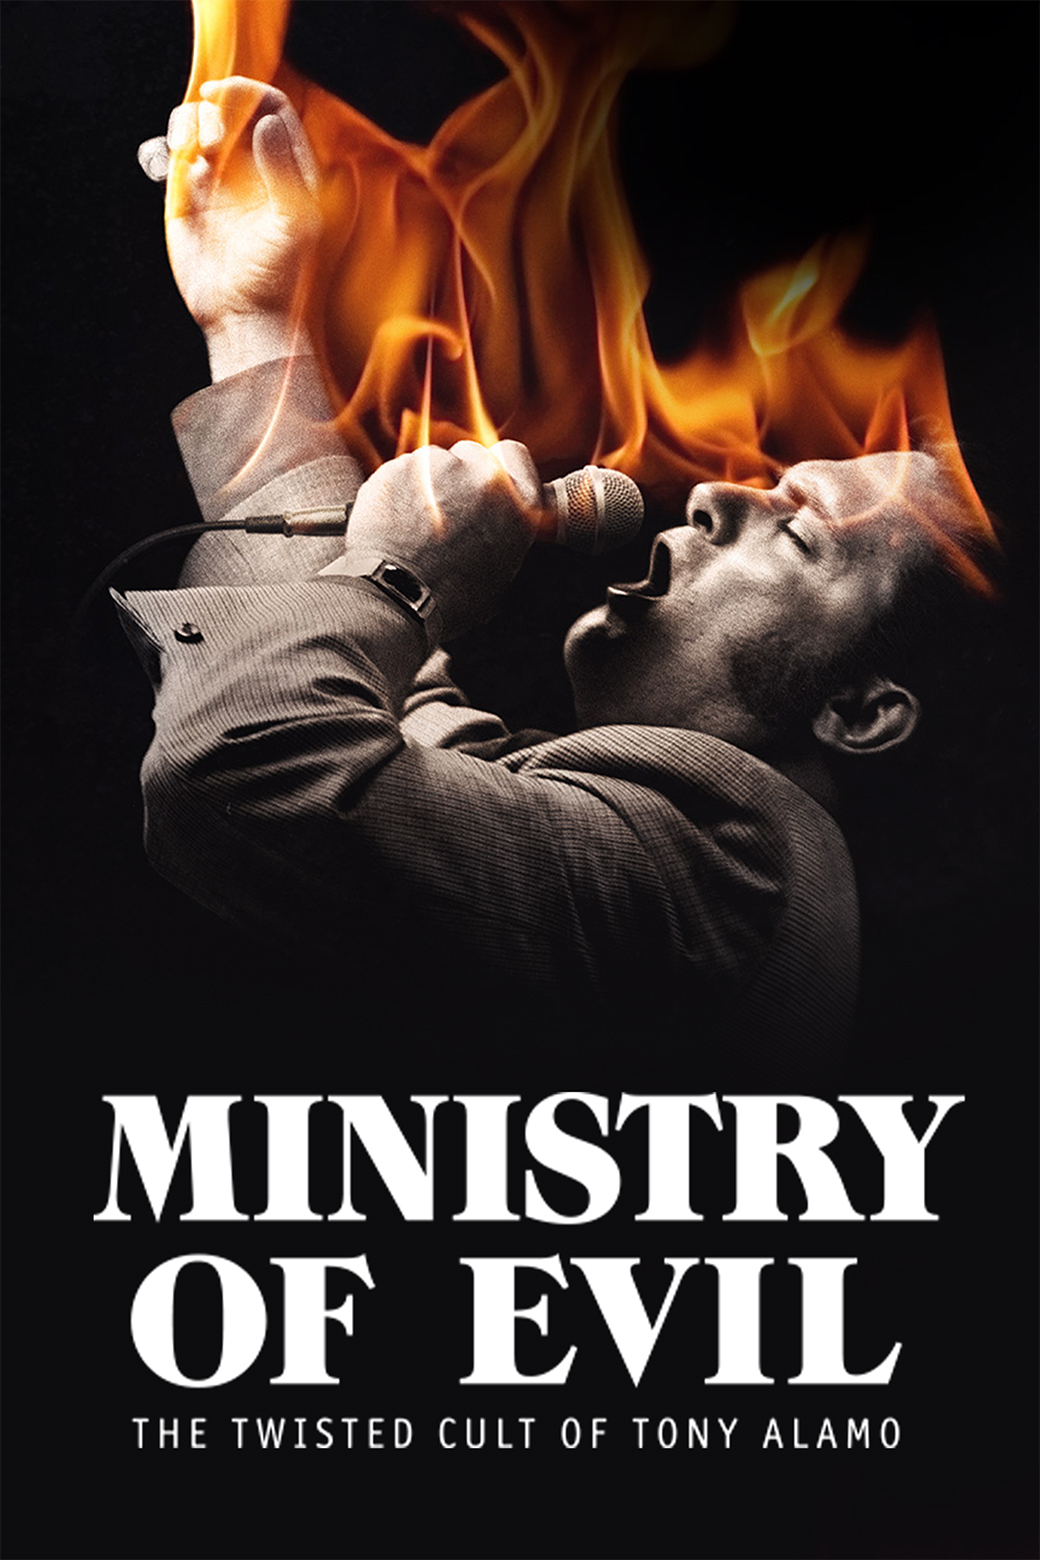 series_tms_SH031323290000_ministry-of-evil-the-twisted-cult-of-tony-alamo__img_poster_2x3